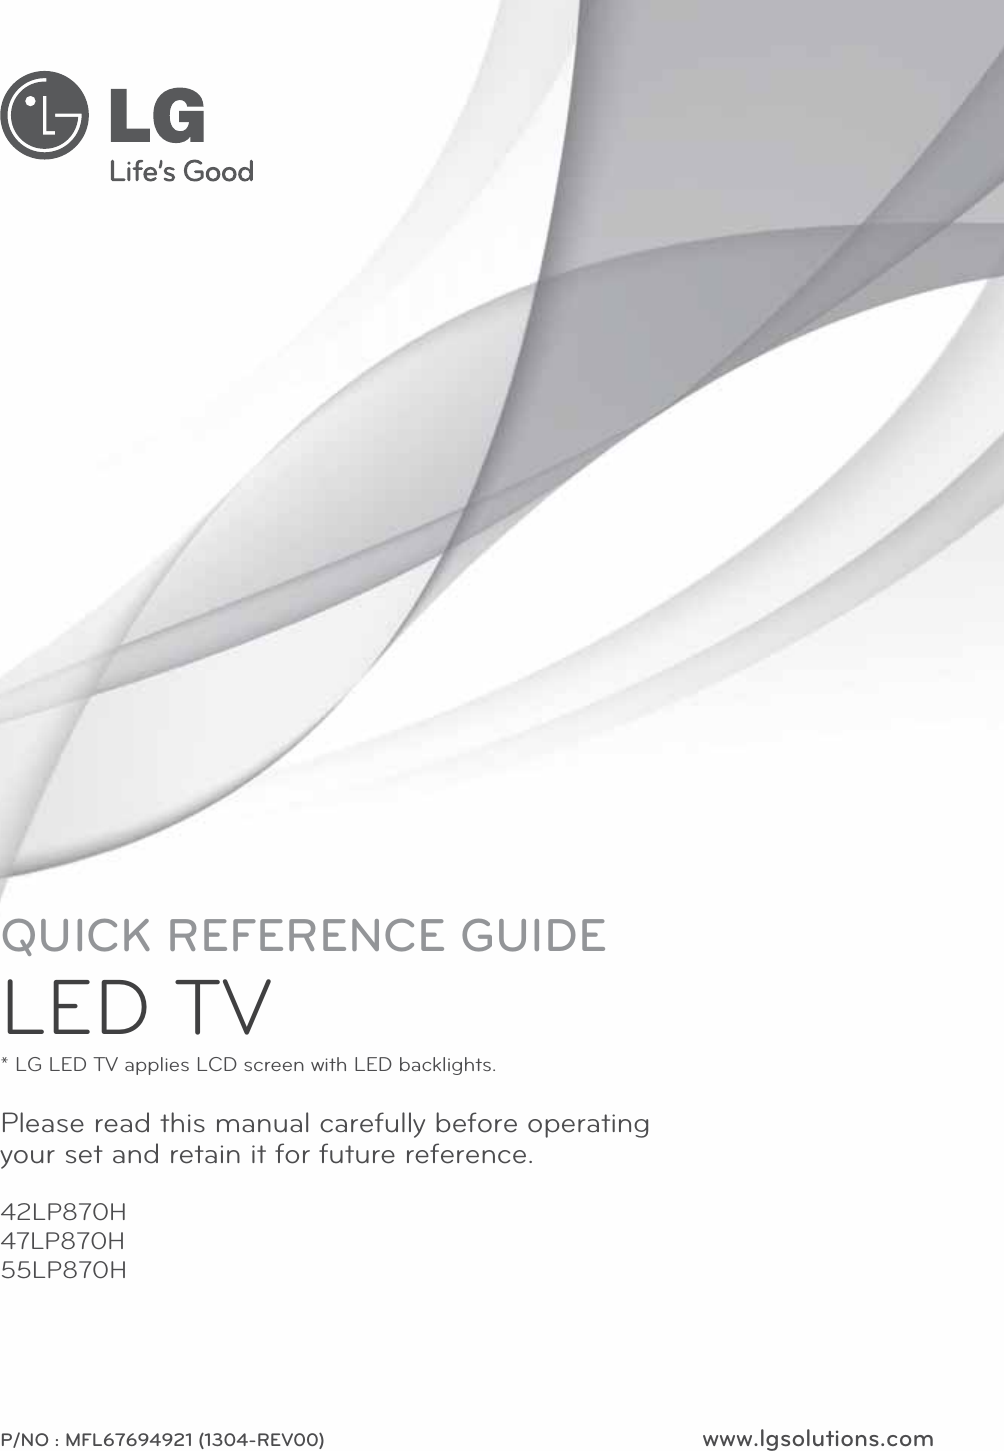 www.lgsolutions.comP/NO : MFL67694921 (1304-REV00)42LP870H47LP870H55LP870HPlease read this manual carefully before operating your set and retain it for future reference.QUICK REFERENCE GUIDELED TV* LG LED TV applies LCD screen with LED backlights.